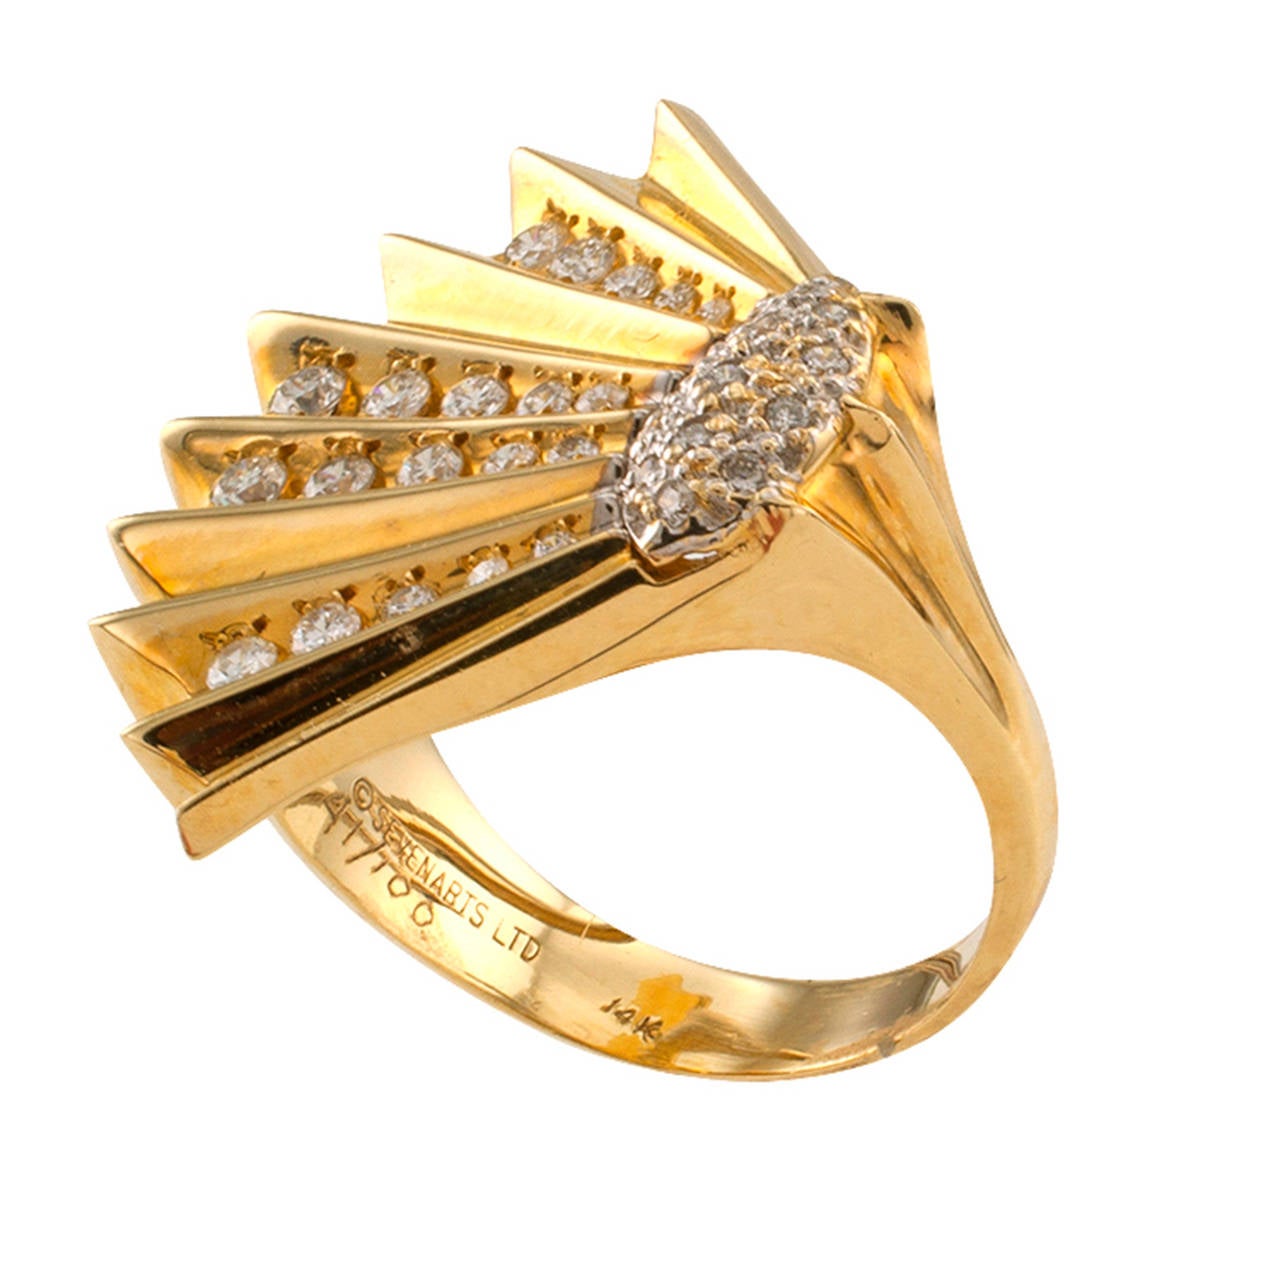 This unique 14 karat gold and diamond ring, signed Erte, numbered 41 out of a limited edition of 100, its unique aesthetics composed by a fan-shaped design fanning out across the hand with diamonds set inside its folds from a diamond pave motif to